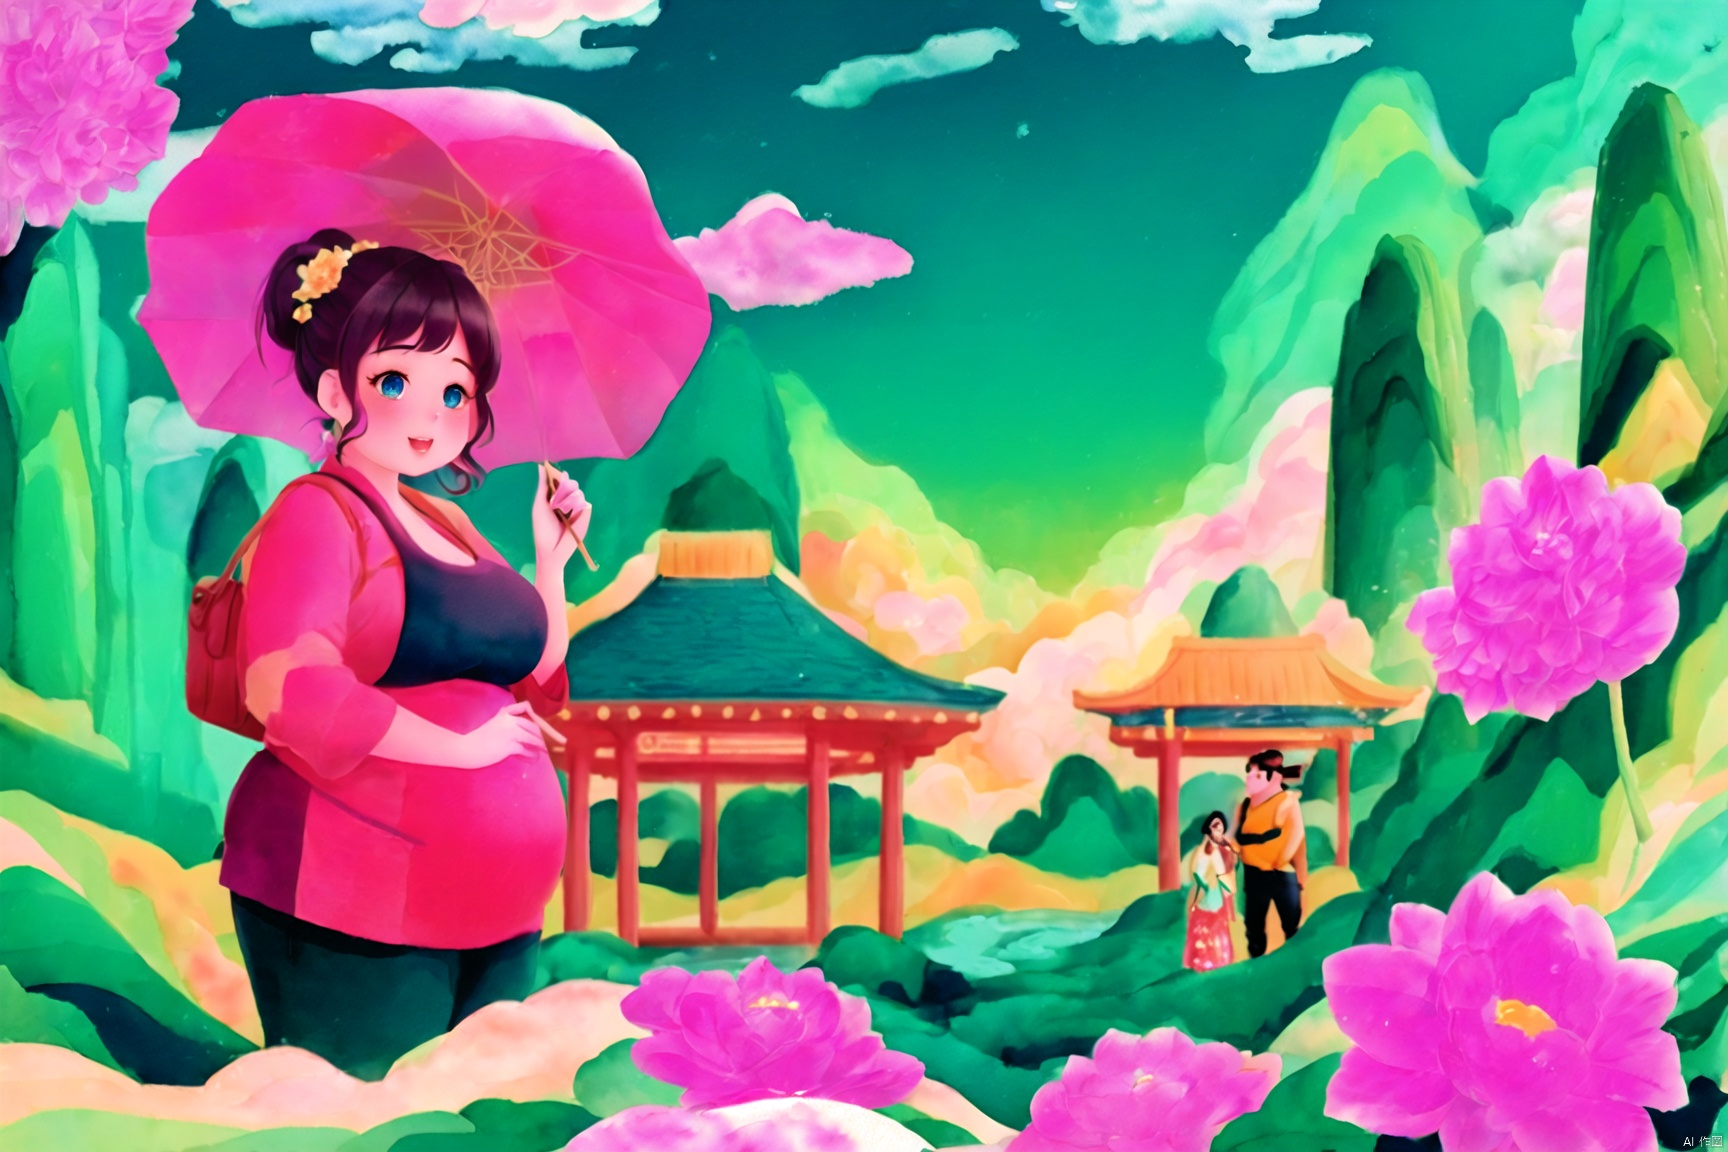 A cute plump girl , a lovely chubby boy meet each other in the virtual world,The art style is cartoon-like, with bright and colorful images,The texture is watercolor, and the cinematography is reminiscent of a movie.